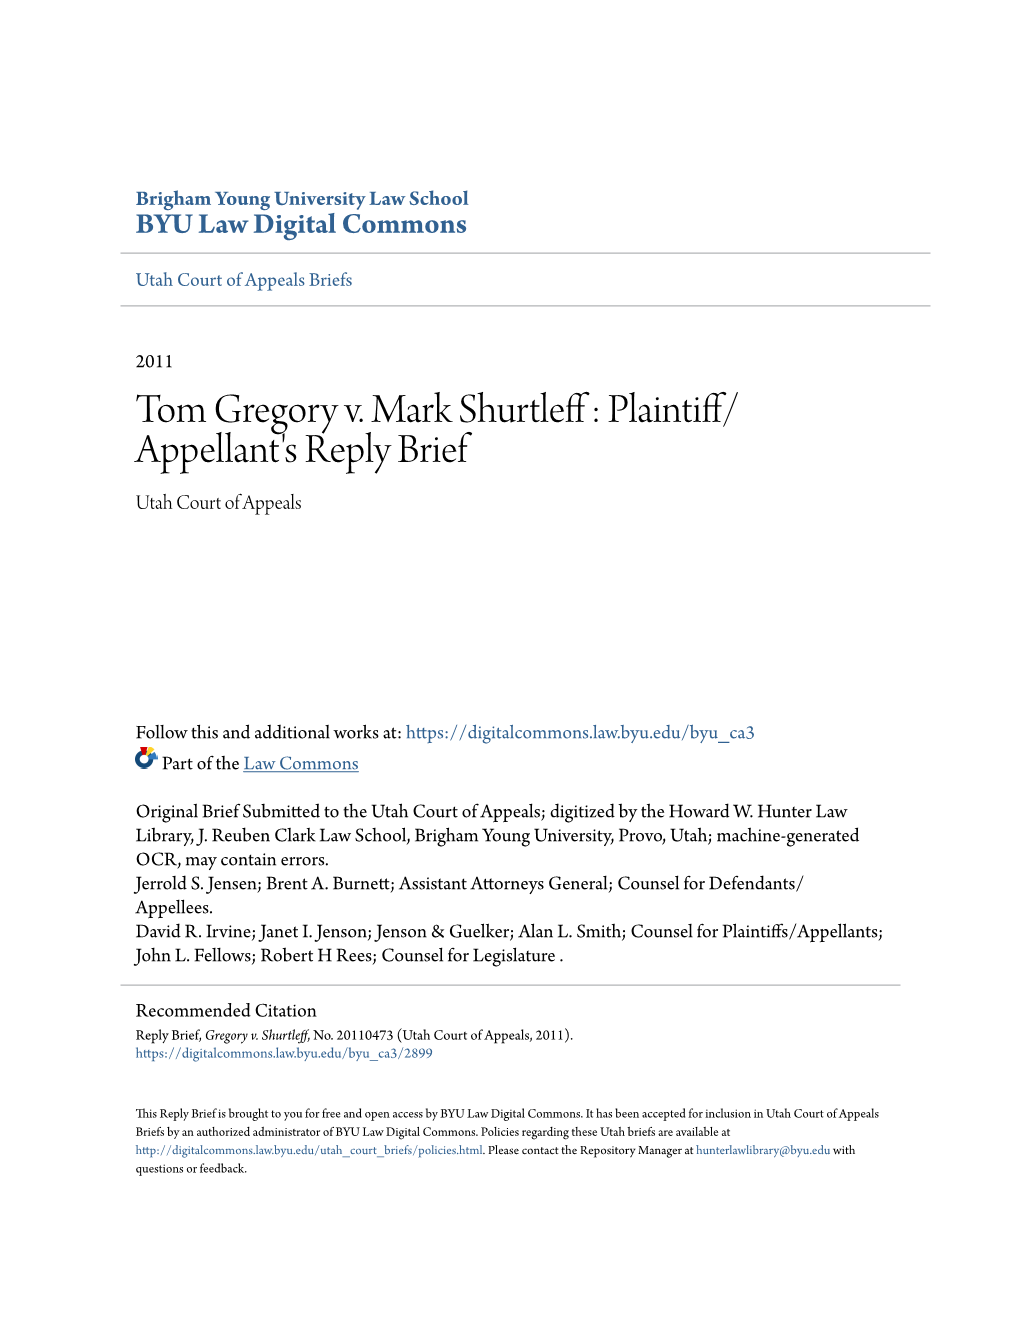 Tom Gregory V. Mark Shurtleff : Lp Aintiff/ Appellant's Reply Brief Utah Court of Appeals